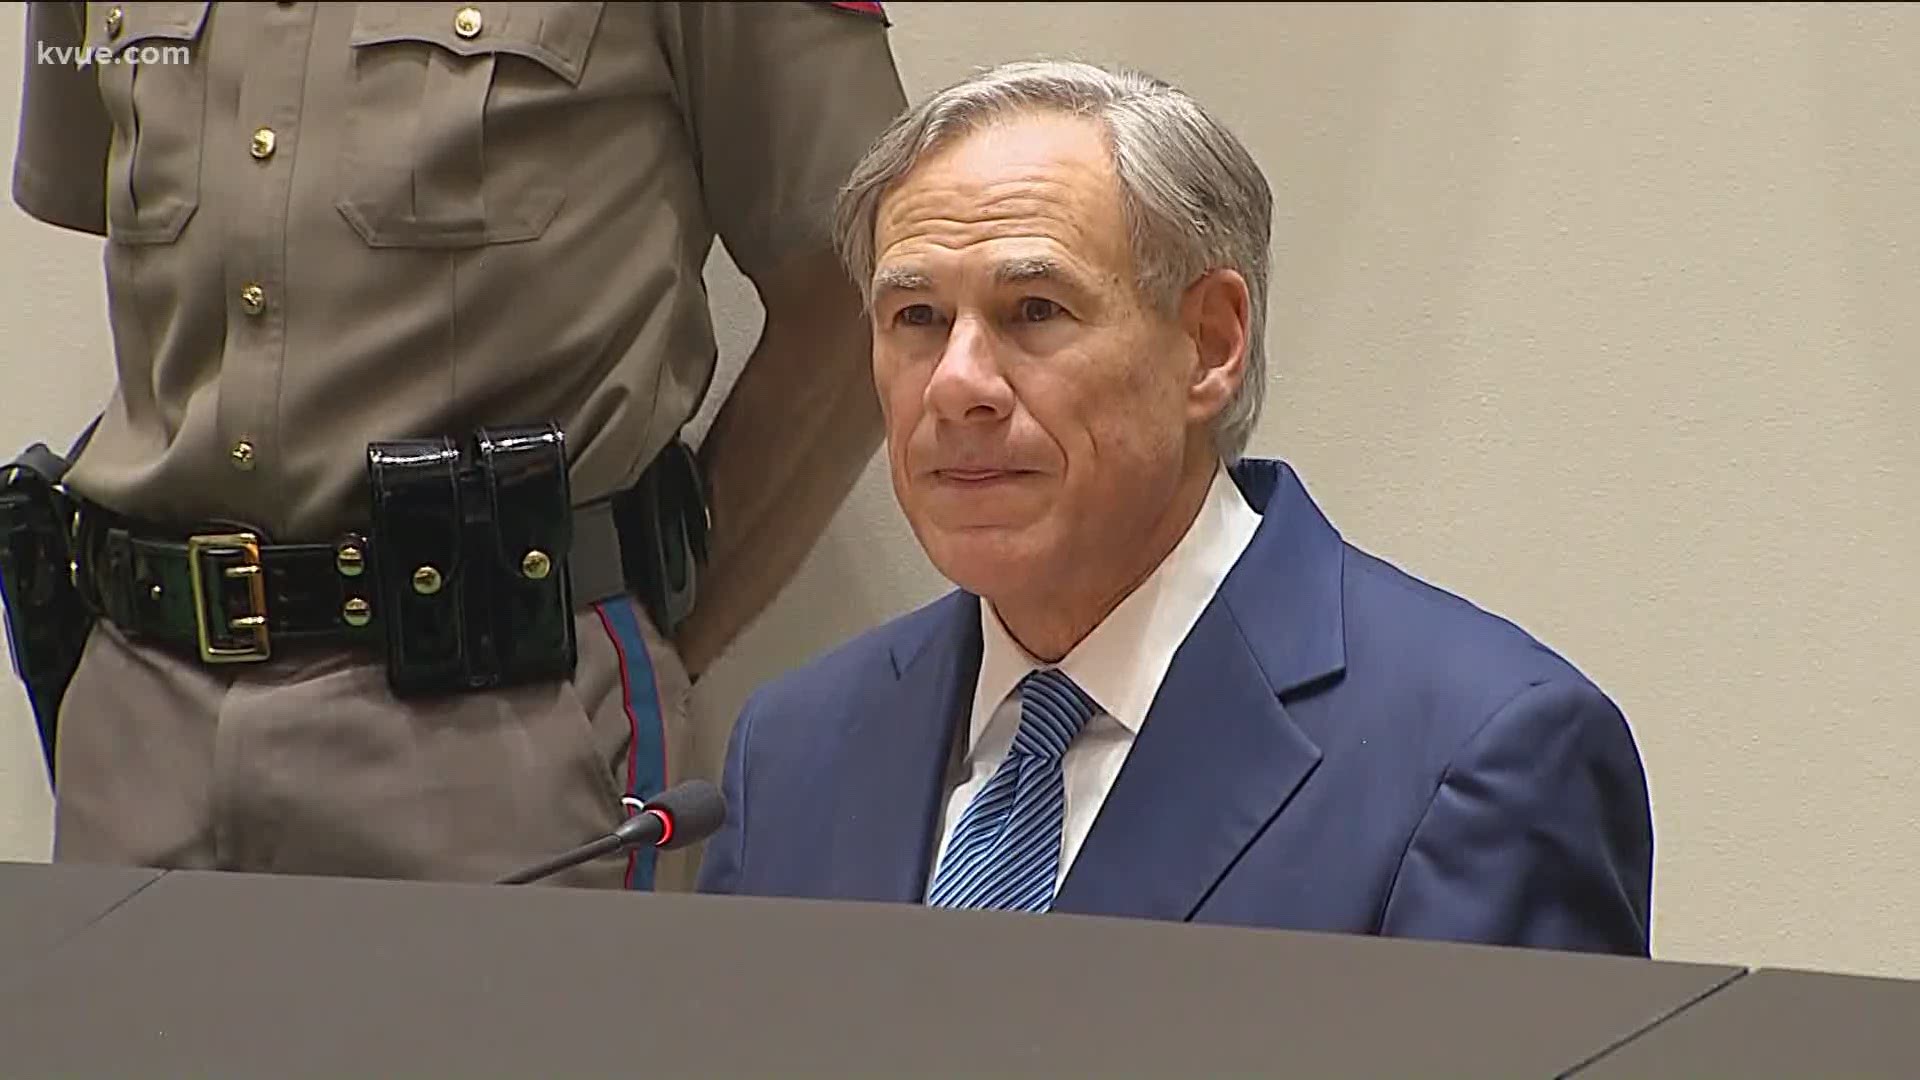 Gov. Greg Abbott joined Dallas area mayors and chiefs on Tuesday, supporting peaceful protesters but making it clear looting won't be tolerated.